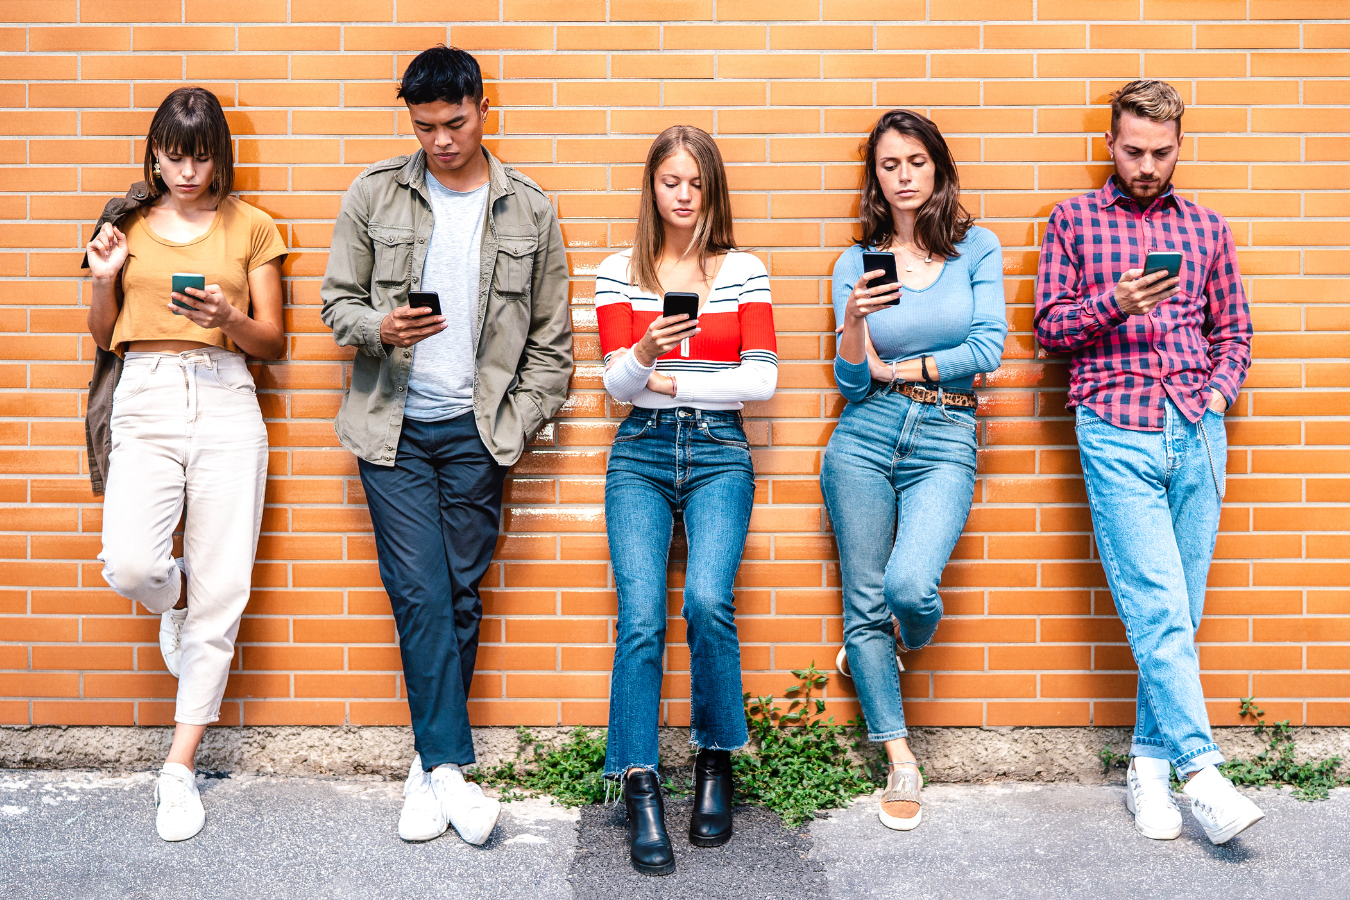 Members of Gen Z using mobile phones, a critical part of any Gen Z marketing plan